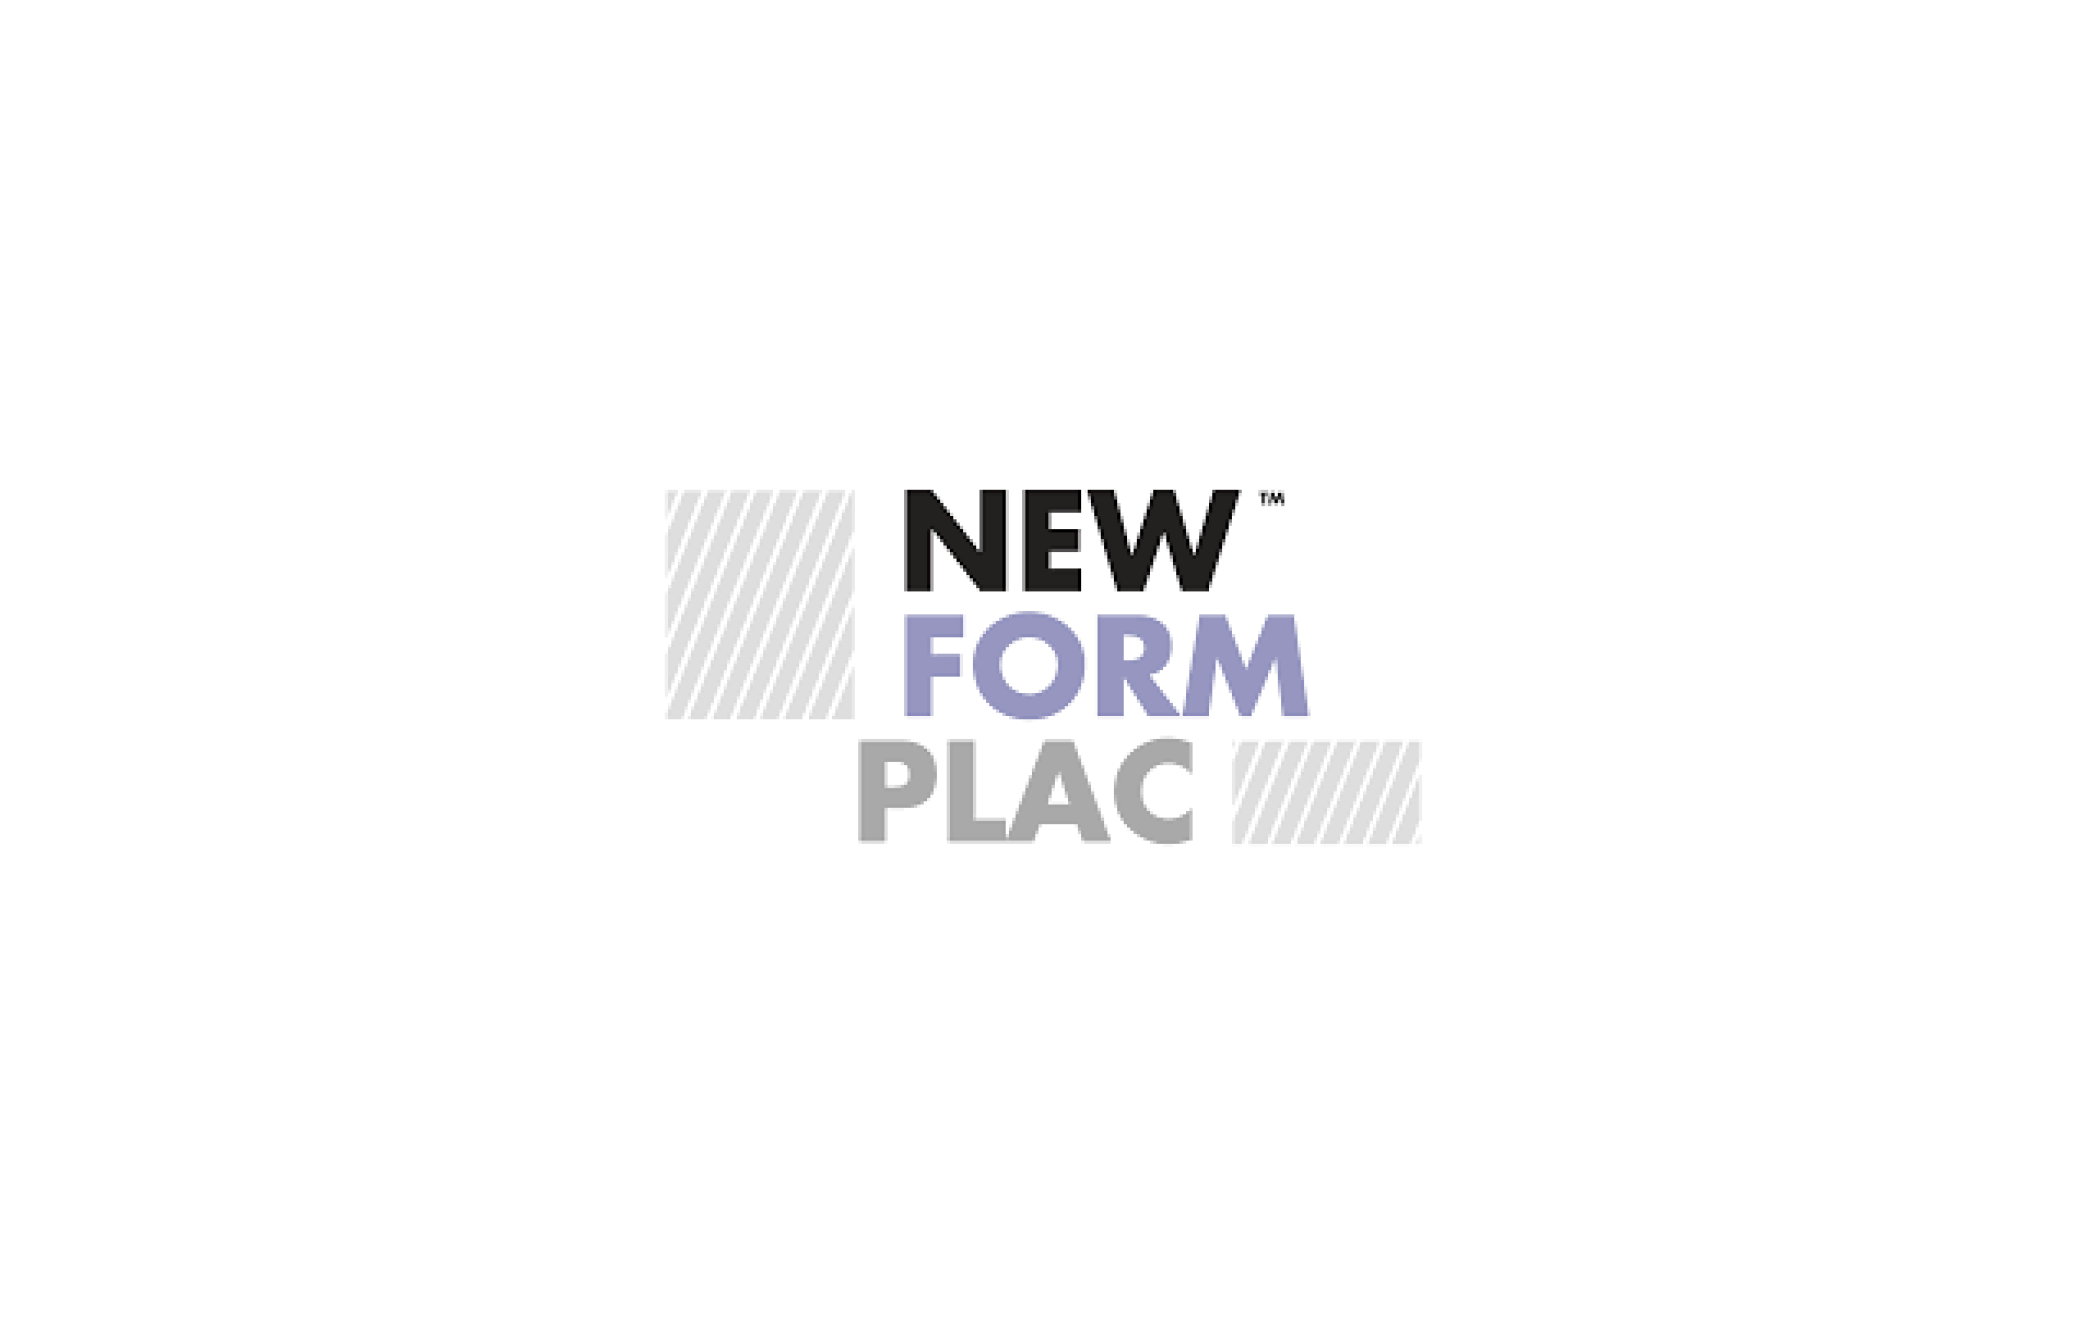 NEW FORM PLAC